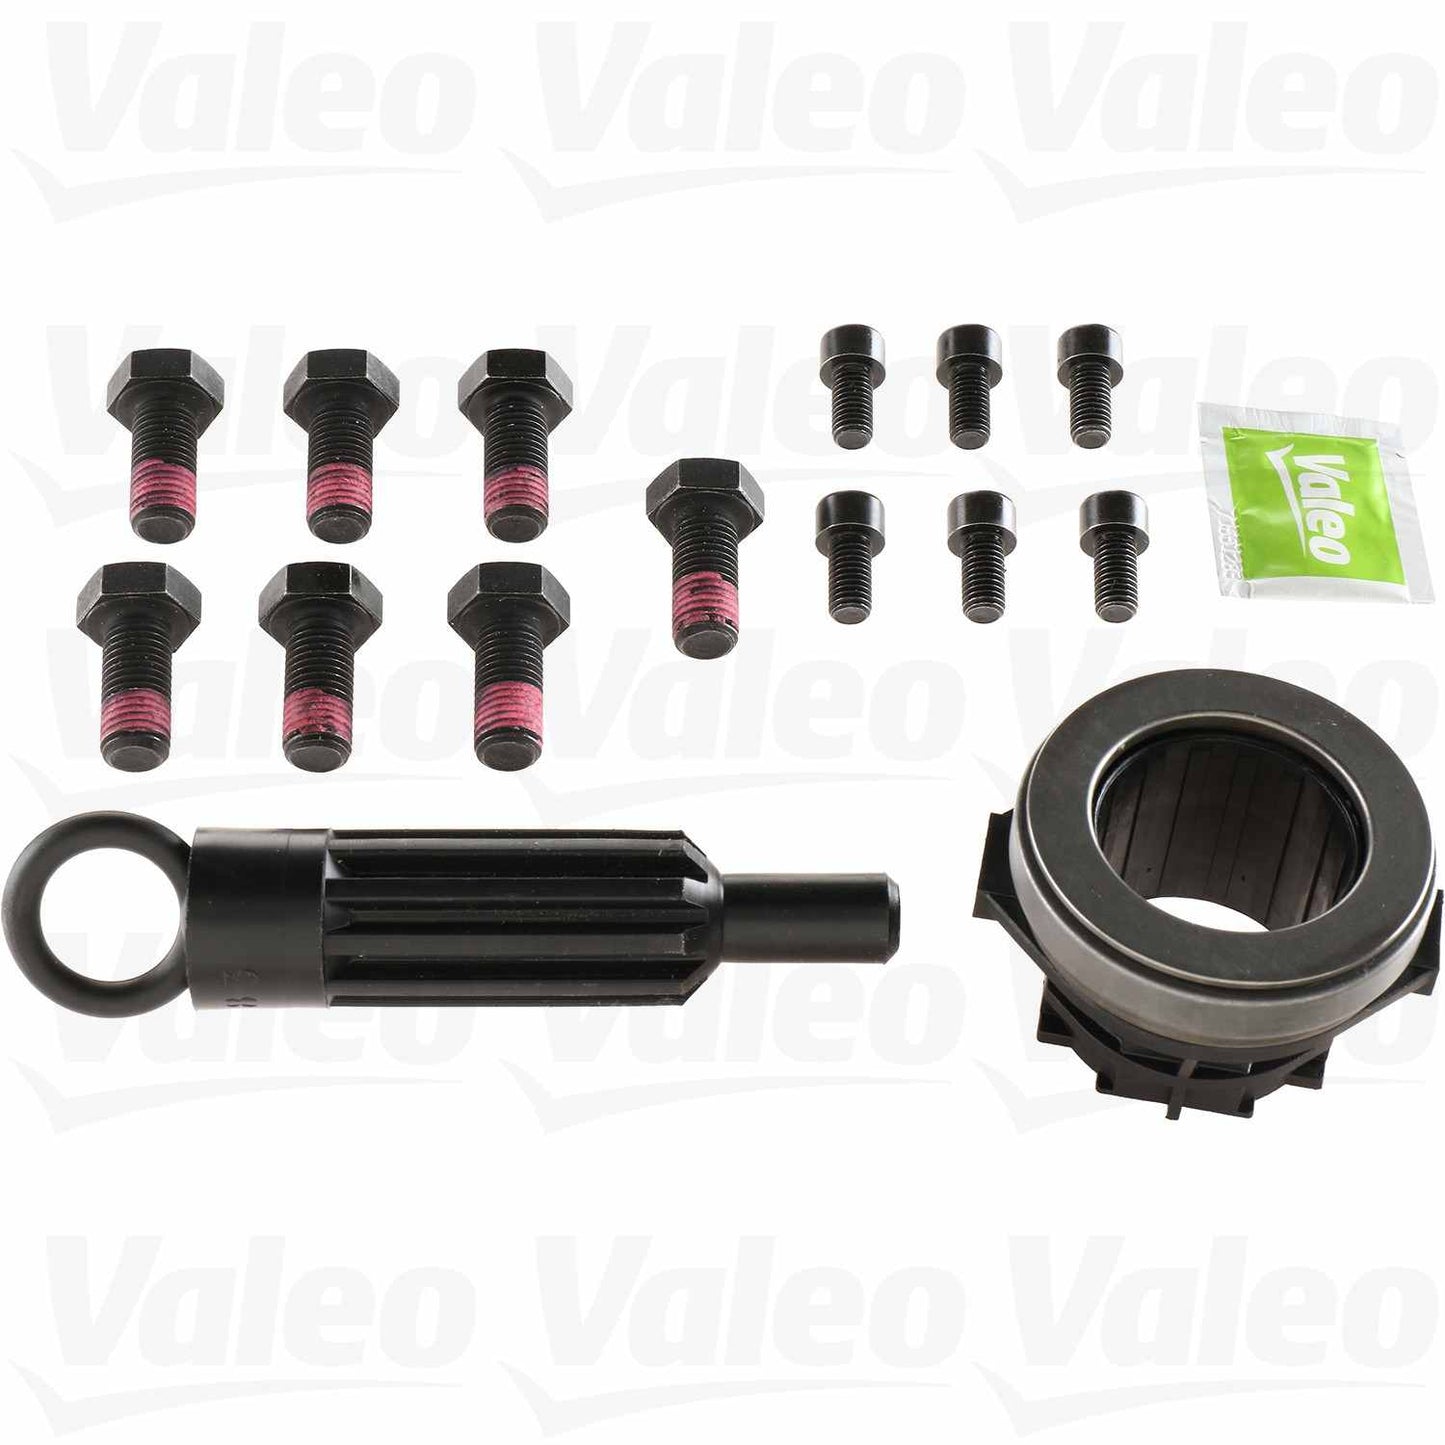 Other View of Clutch Flywheel Conversion Kit VALEO 52401220